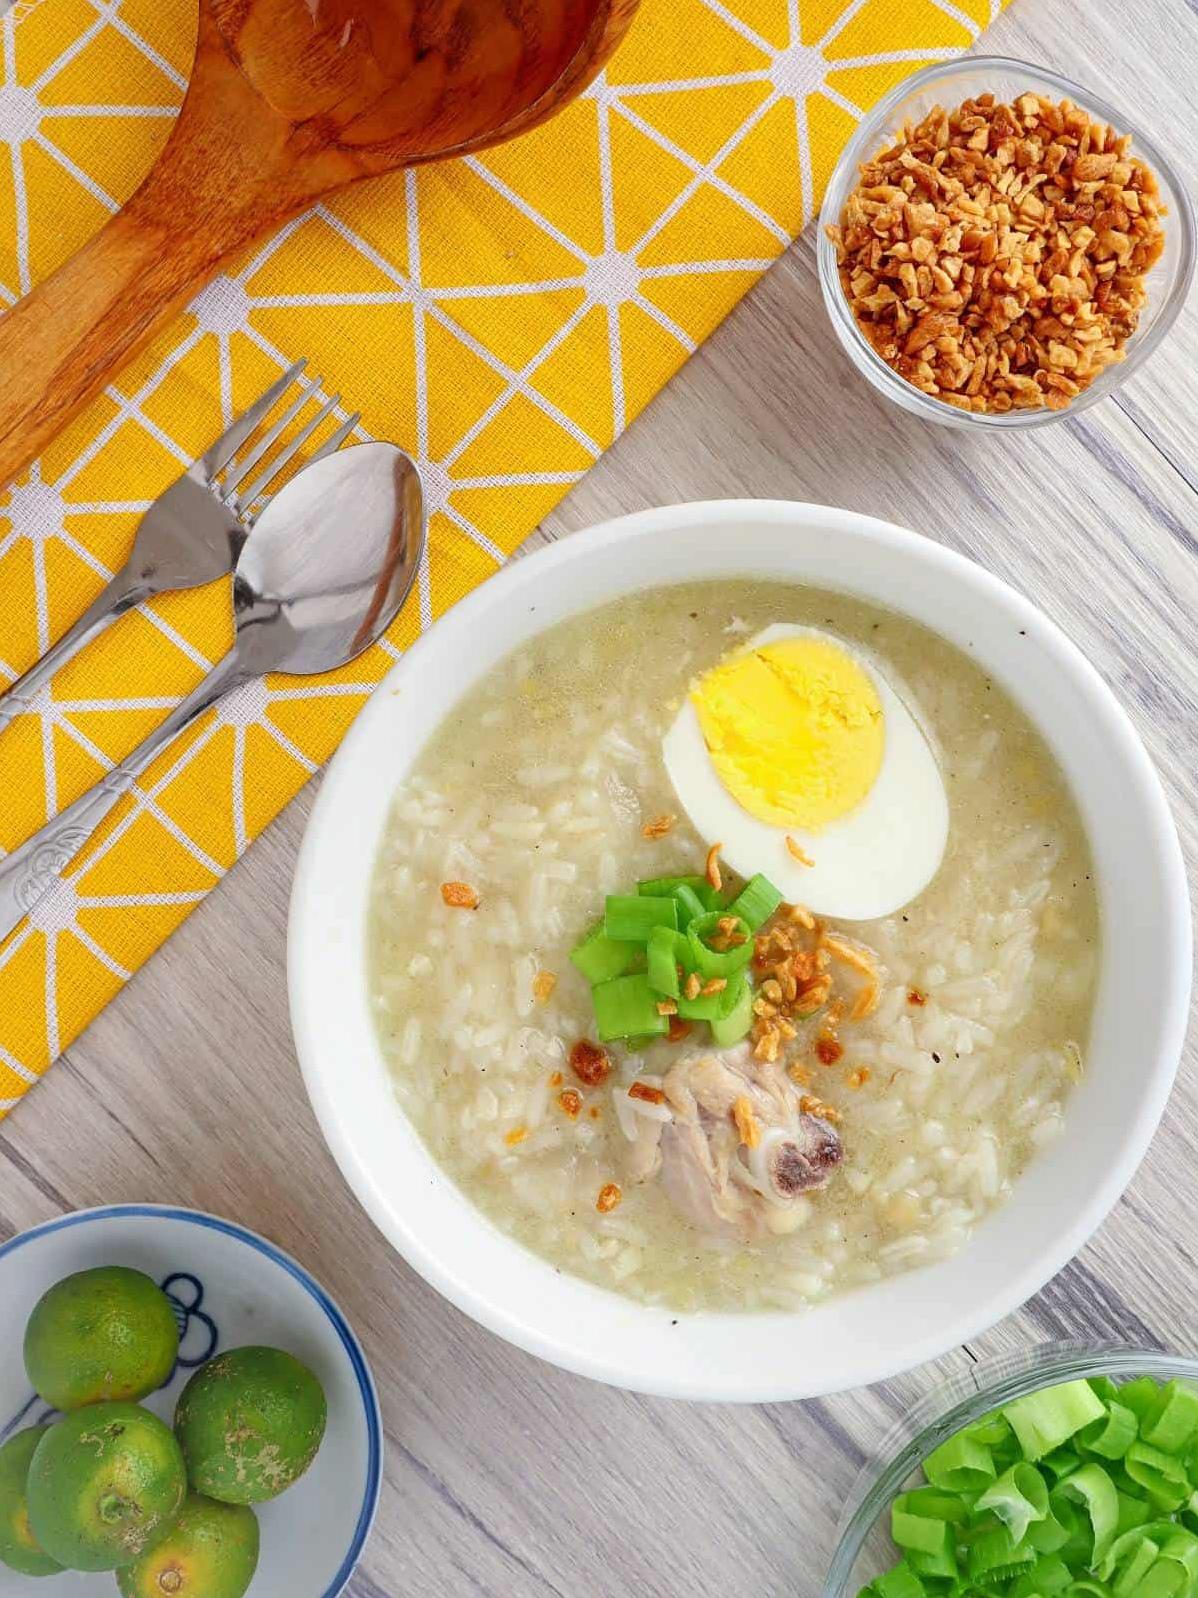  Give your taste buds a treat with a mouthwatering spoonful of this hearty Arroz Caldo.